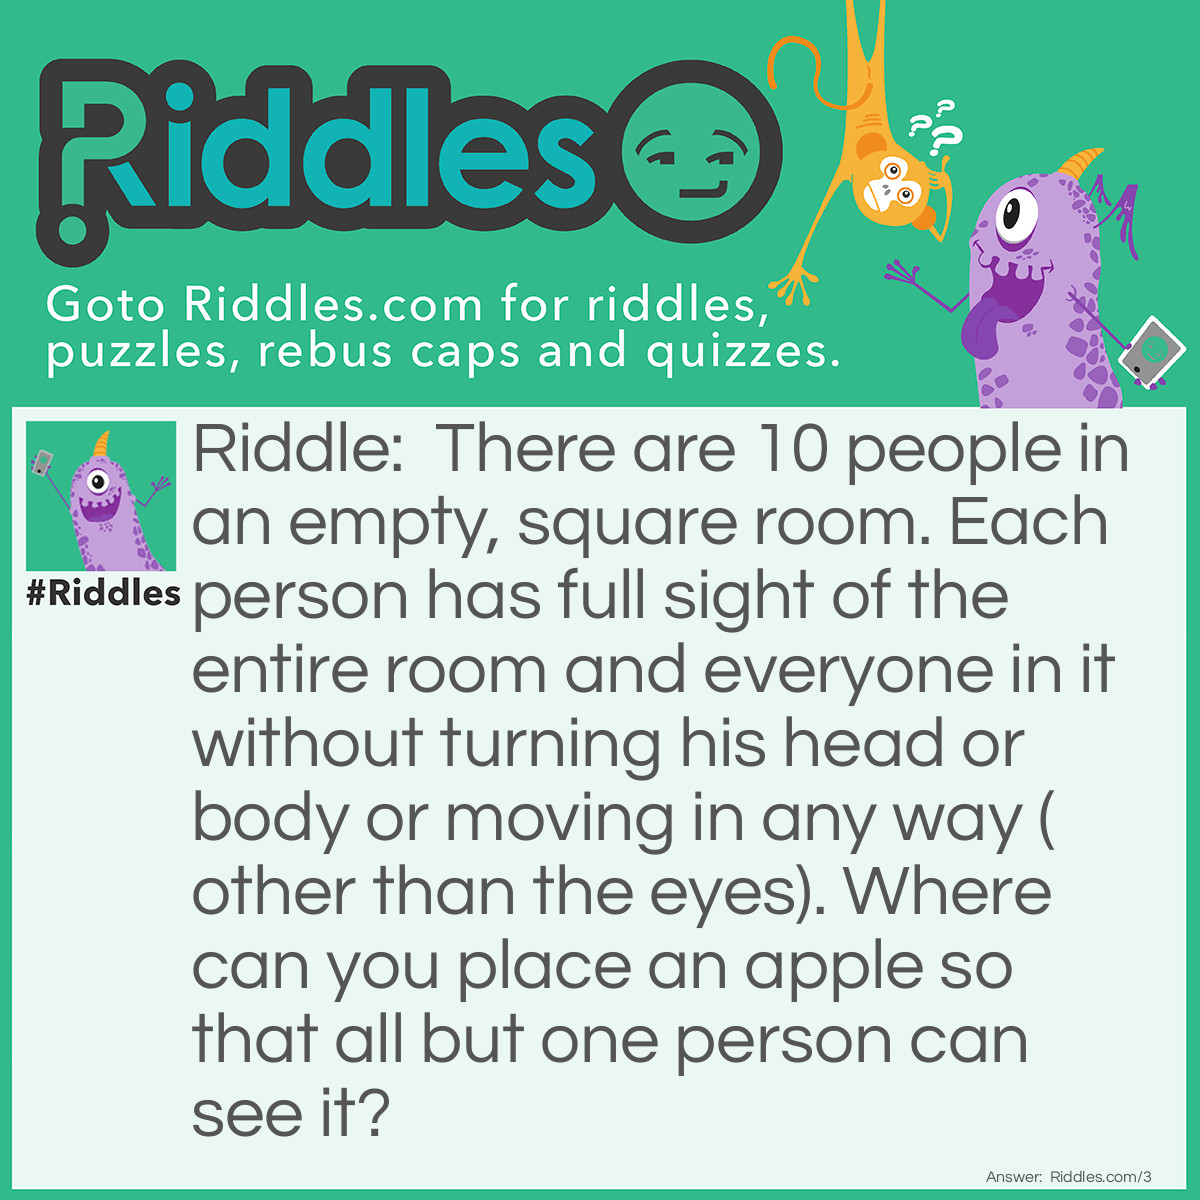 Riddle: There are 10 people in an empty, square room. Each person has full sight of the entire room and everyone in it without turning his head or body or moving in any way (other than the eyes). Where can you place an apple so that all but one person can see it? Answer: Place the apple on one person's head.